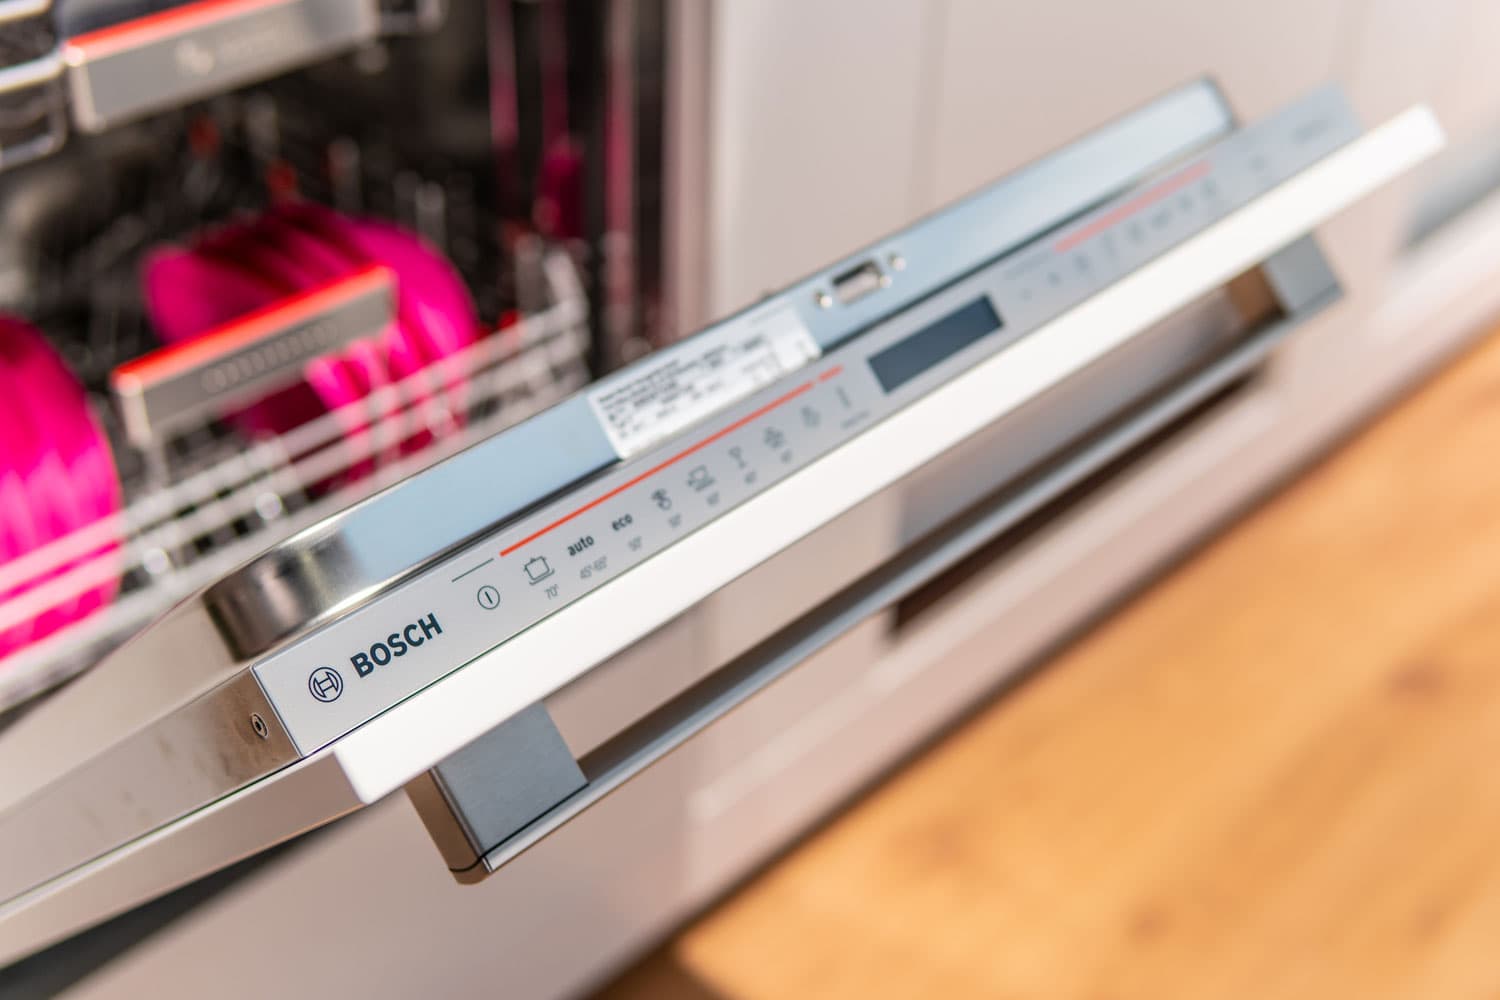 new Built-in Bosch VarioScharnier SME68TX26E dishwasher on display, at Robert Bosch exhibition pavilion showroom, stand at Global Innovations Show IFA